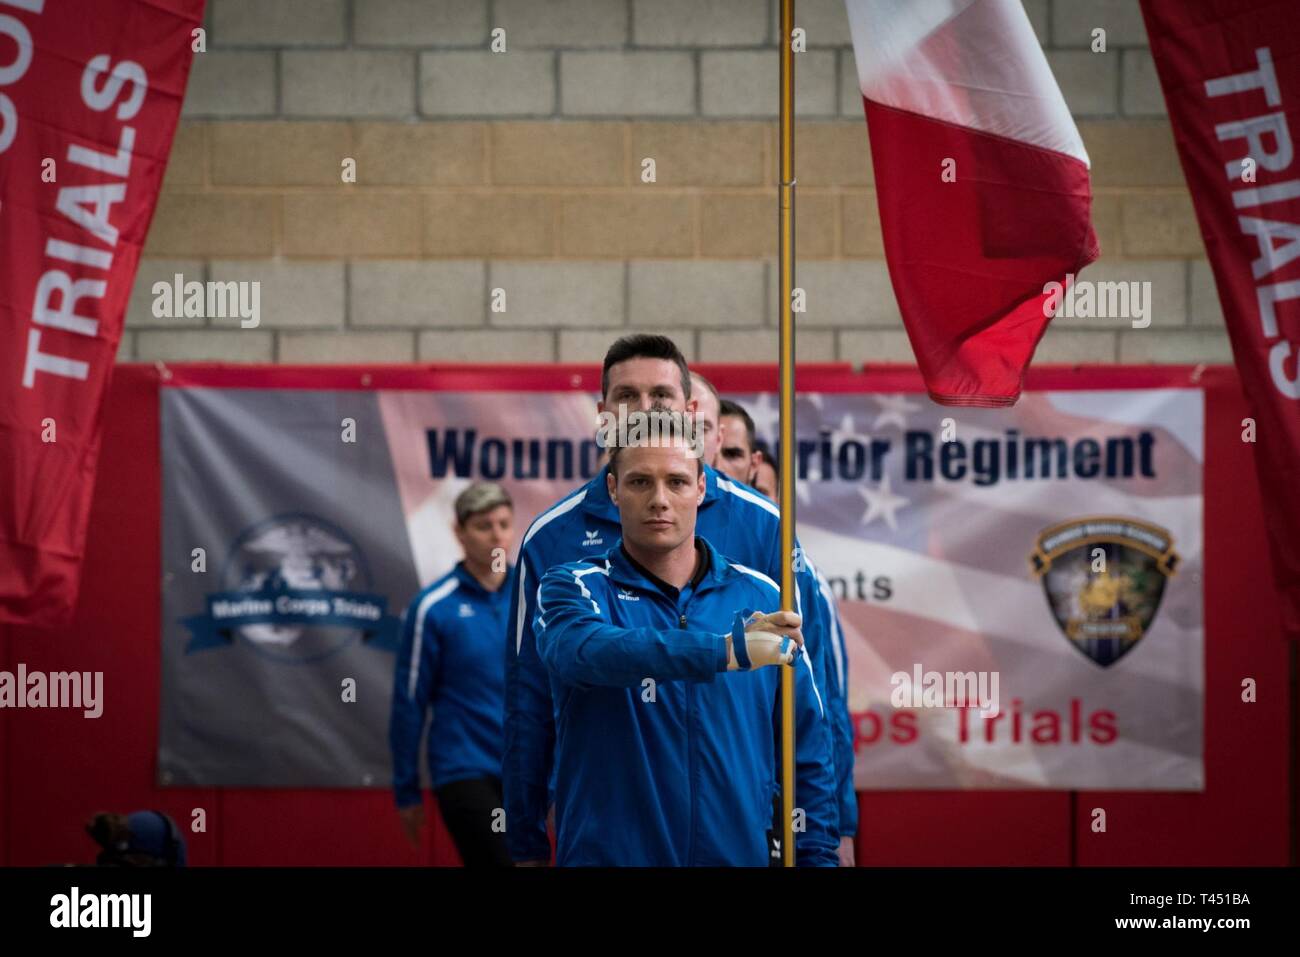 MARINE CORPS BASE CAMP PENDLETON, CALIFORNIA – Athletes from Team France march with their nation’s colors during the 2019 Marine Corps Trials opening ceremony at Marine Corps Base Camp Pendleton, California, Feb. 26, 2019. The Marine Corps Trials promotes recovery and rehabilitation for nearly 200 recovering service members and veterans through adaptive sport participation and serves as the primary venue to select Marine Corps participants for the DoD Warrior Games. (Official U.S. Marine Corps Stock Photo